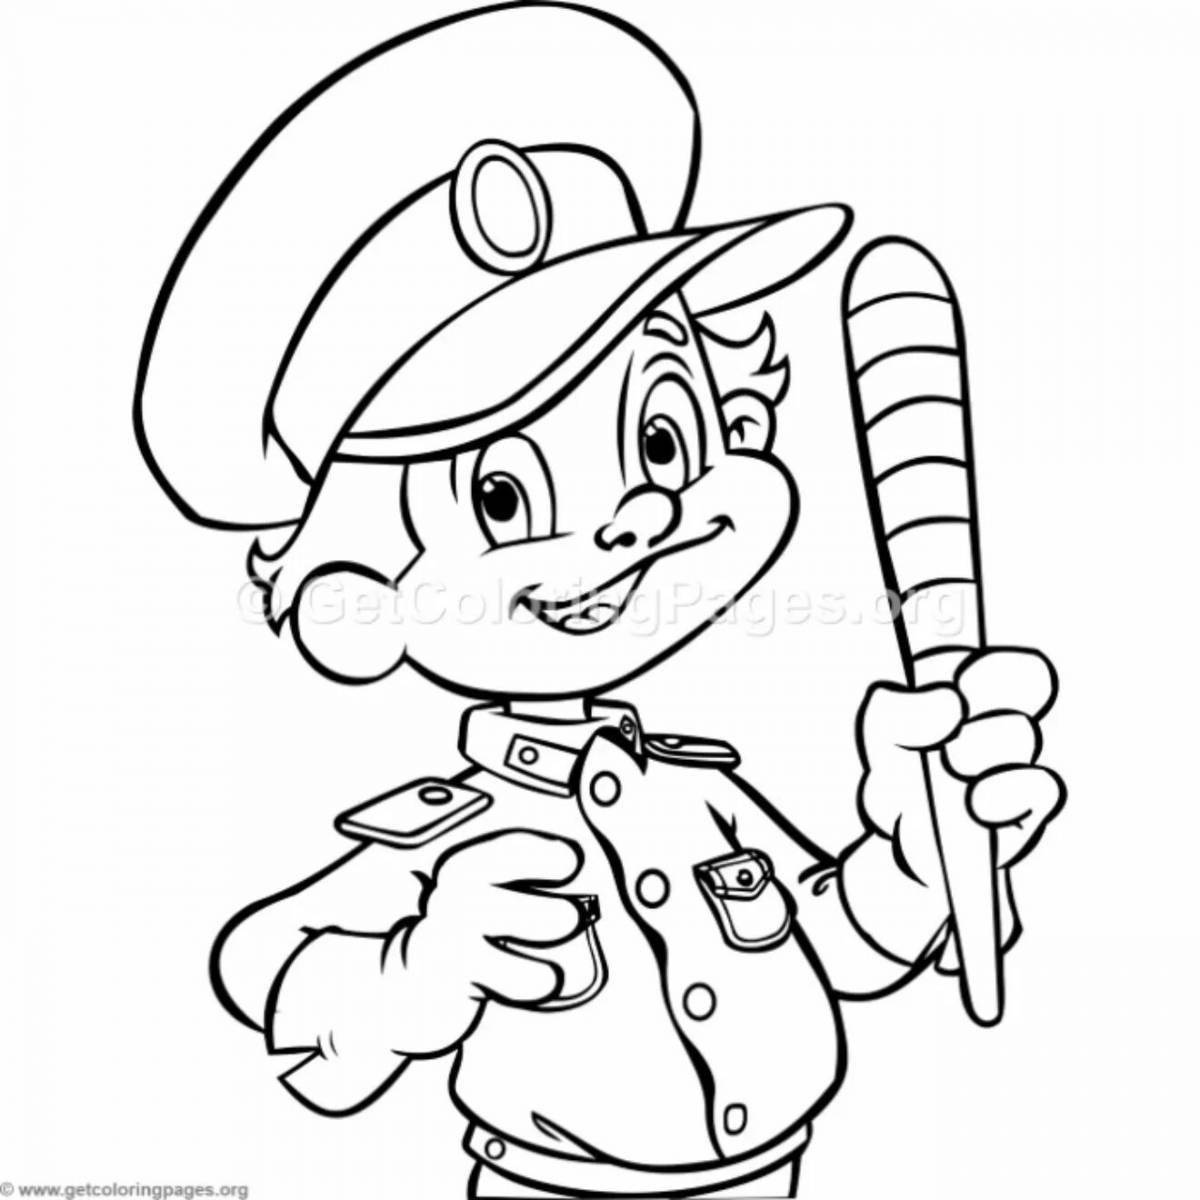 Colorful traffic police inspector coloring page